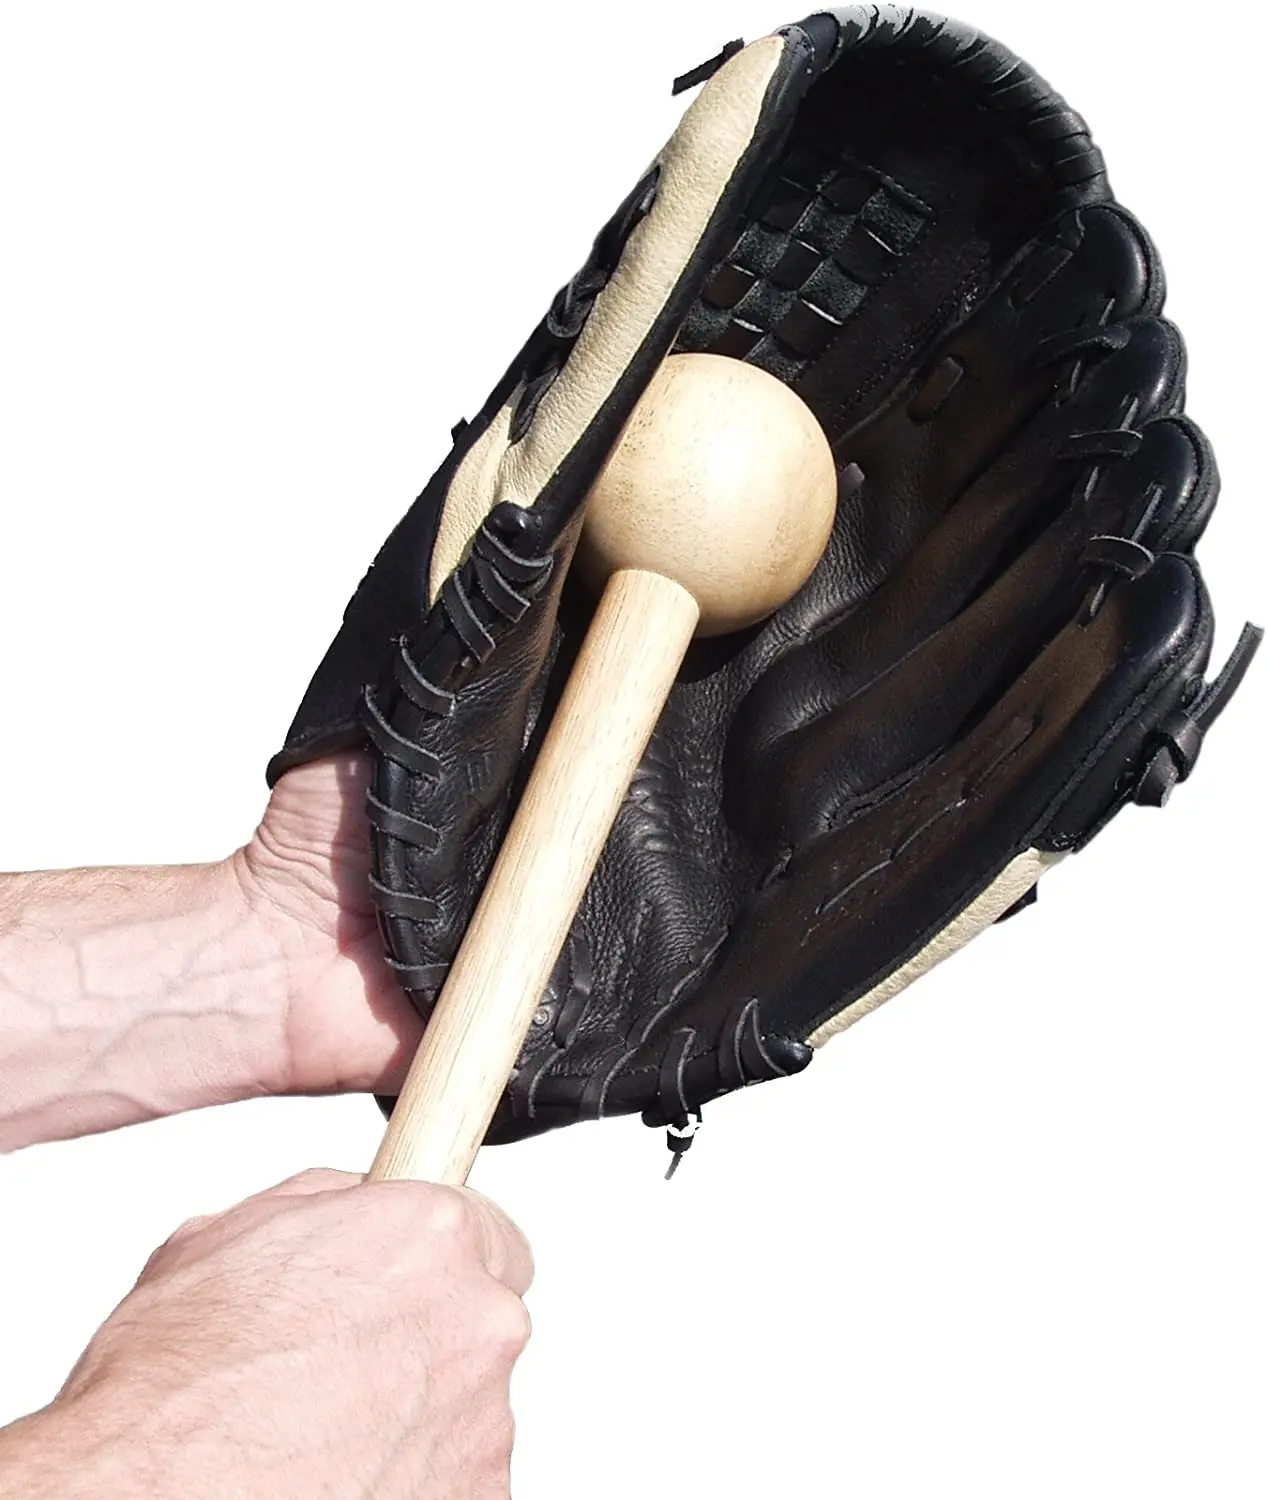 Solid wood Mallet for baseball glove Break-in and Shaping